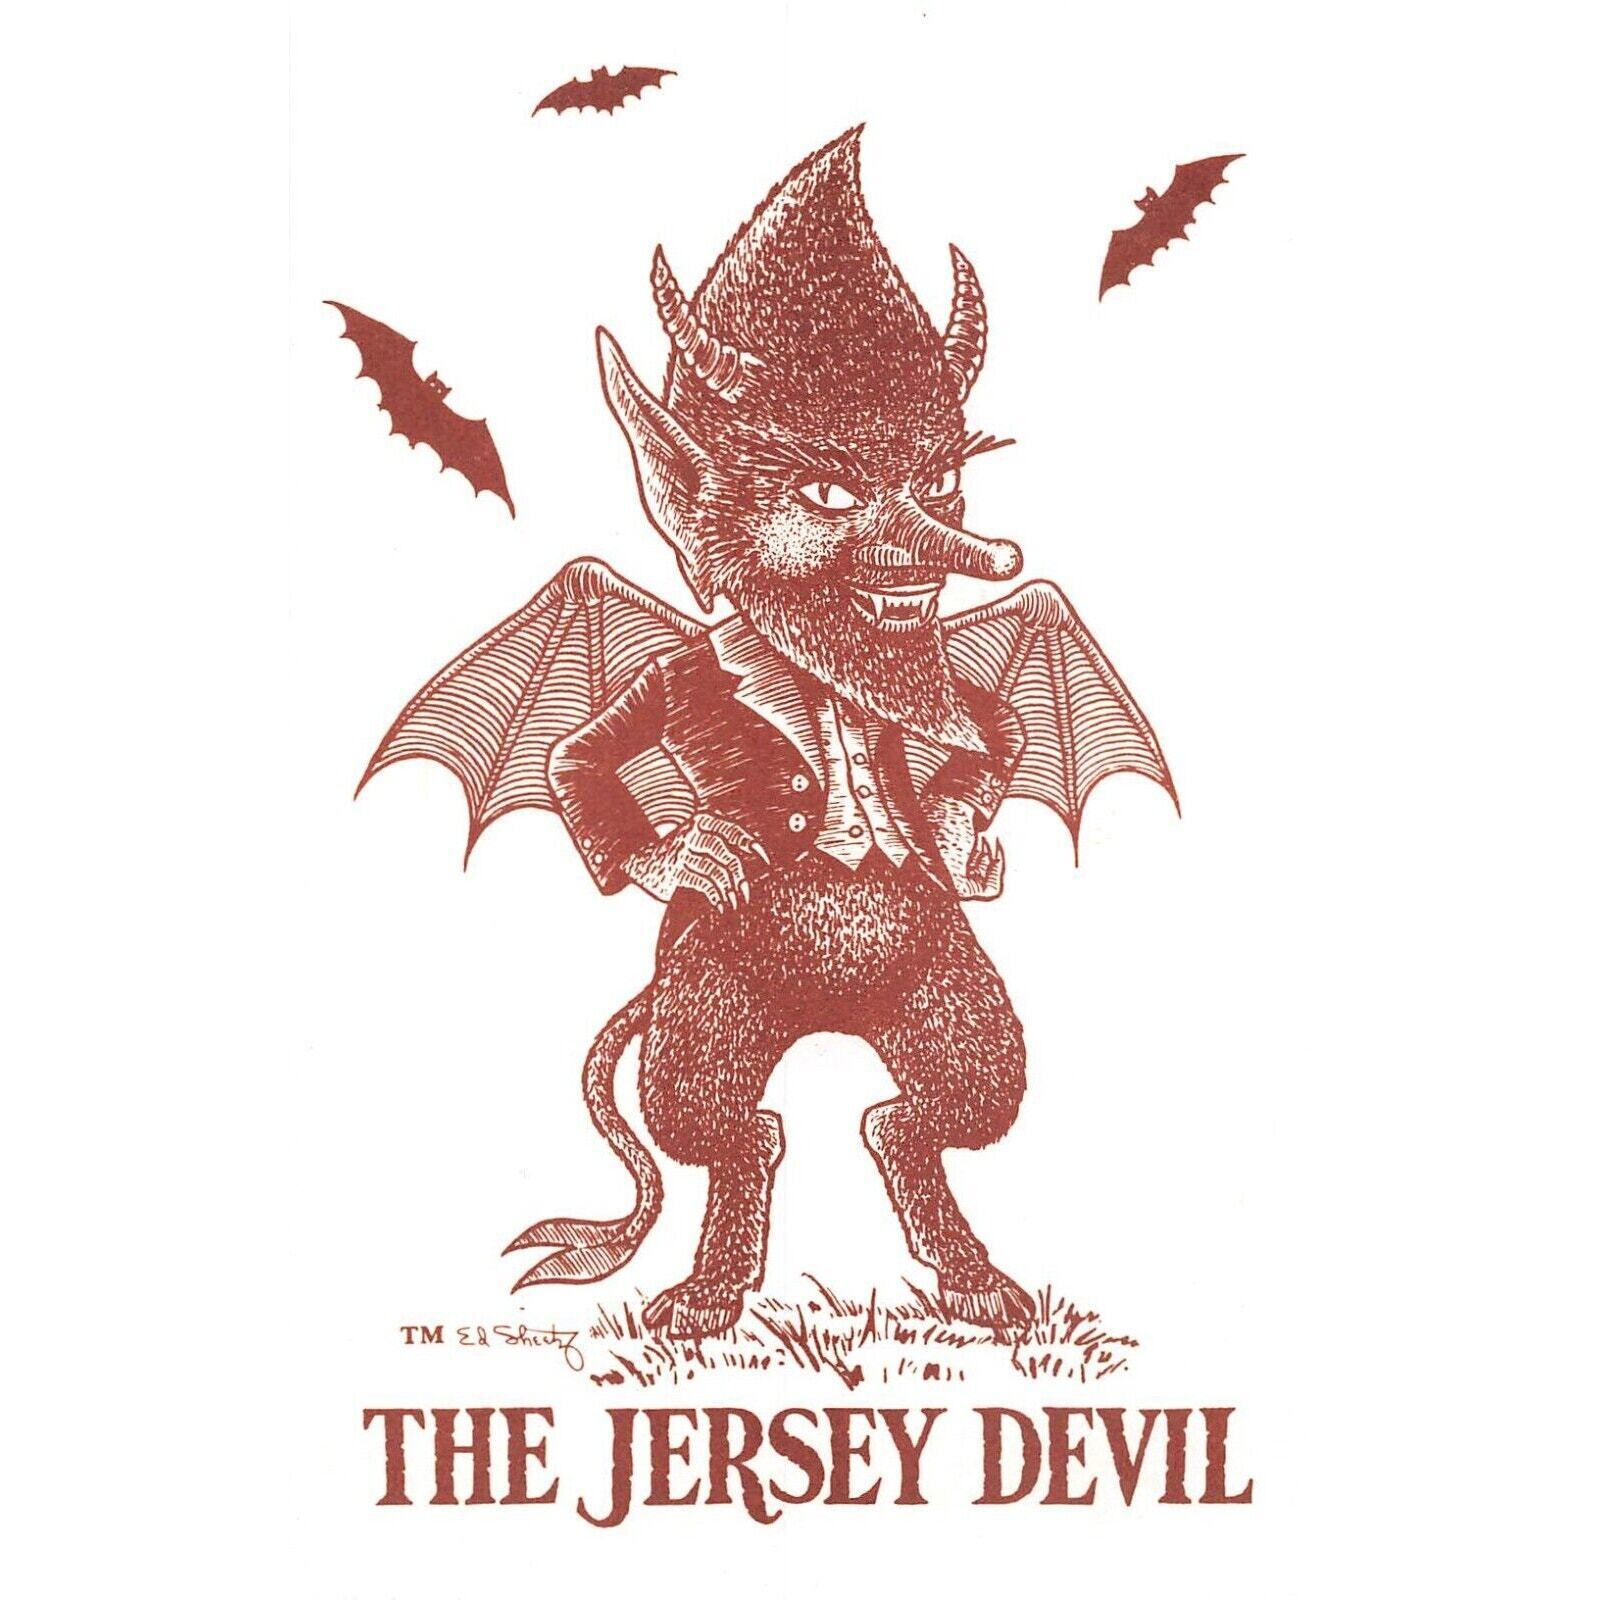 The Jersey Devil 1975 1982 Ed Sheetz Unposted Vintage Post Card